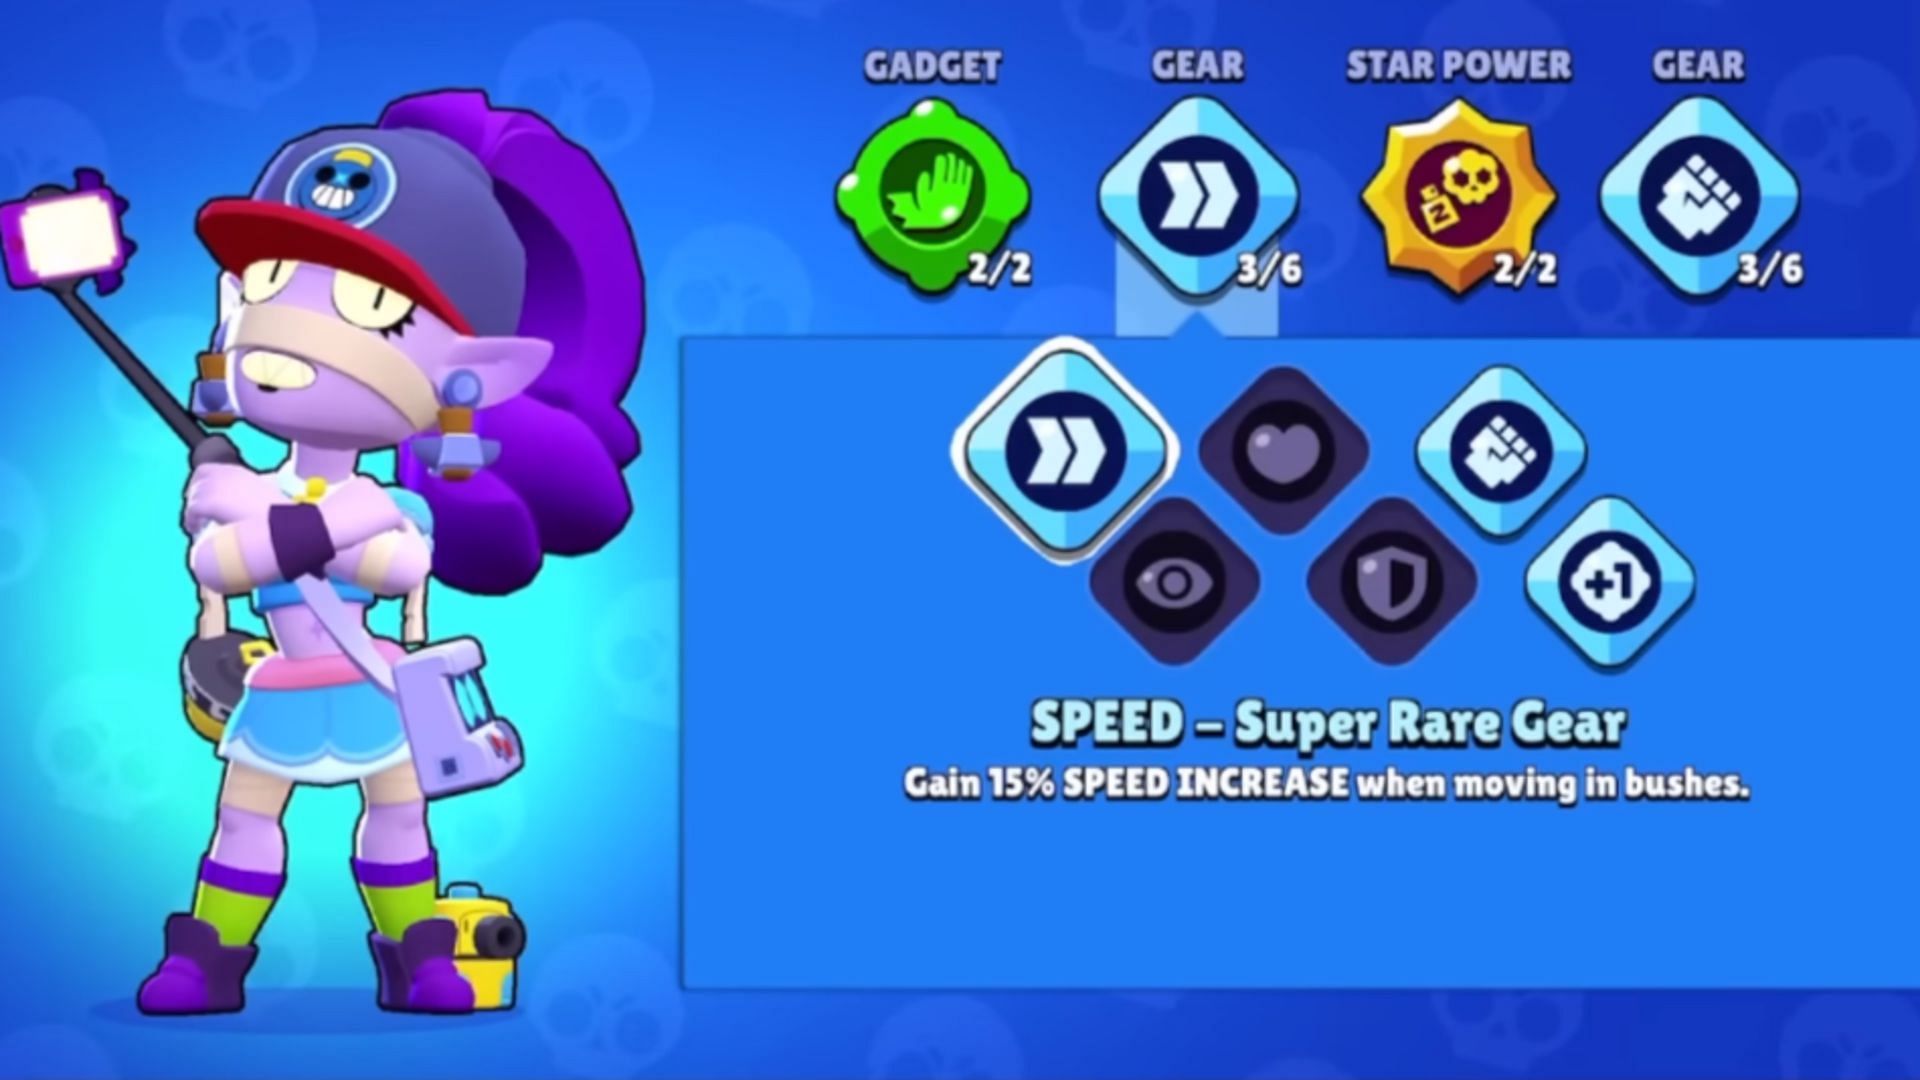 Speed - Super Rare Gear (Image via Supercell)